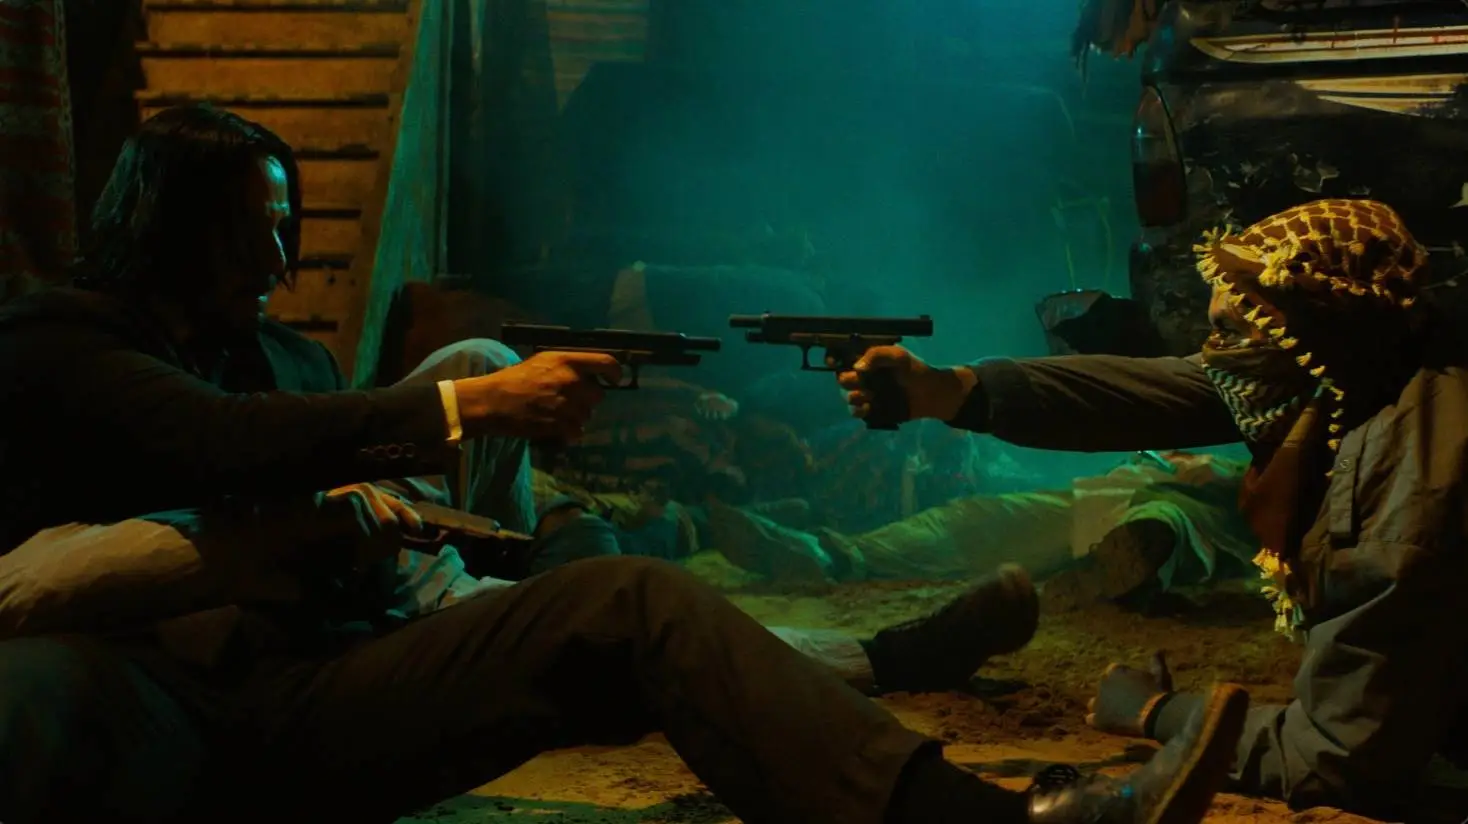 Two individuals engaged in a close-quarters gunpoint standoff in the latest SYFY TV show.